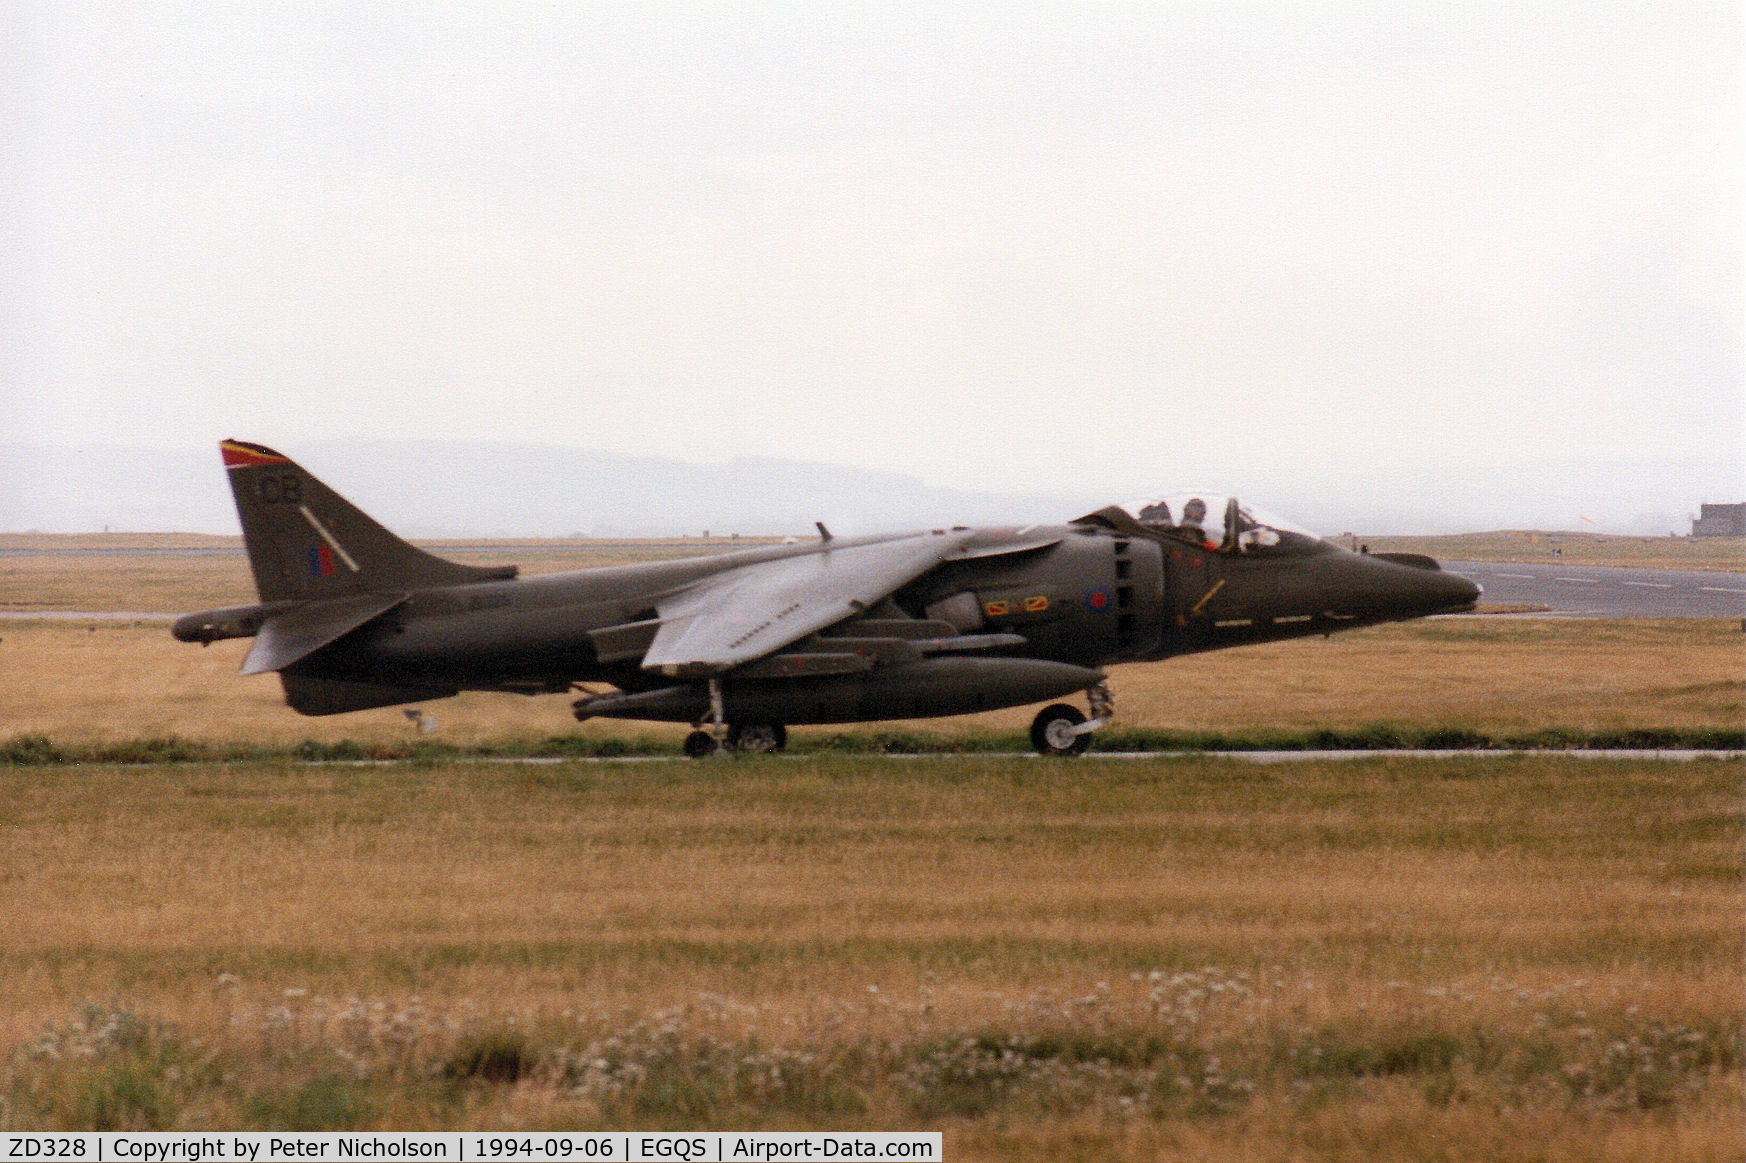 ZD328, 1988 British Aerospace Harrier GR.7 C/N 512116/P9, Harrier GR.7, callsign Rafair 620 Bravo, of 4 Squadron taxying to Runway 23 at RAF Lossiemouth in September 1994.